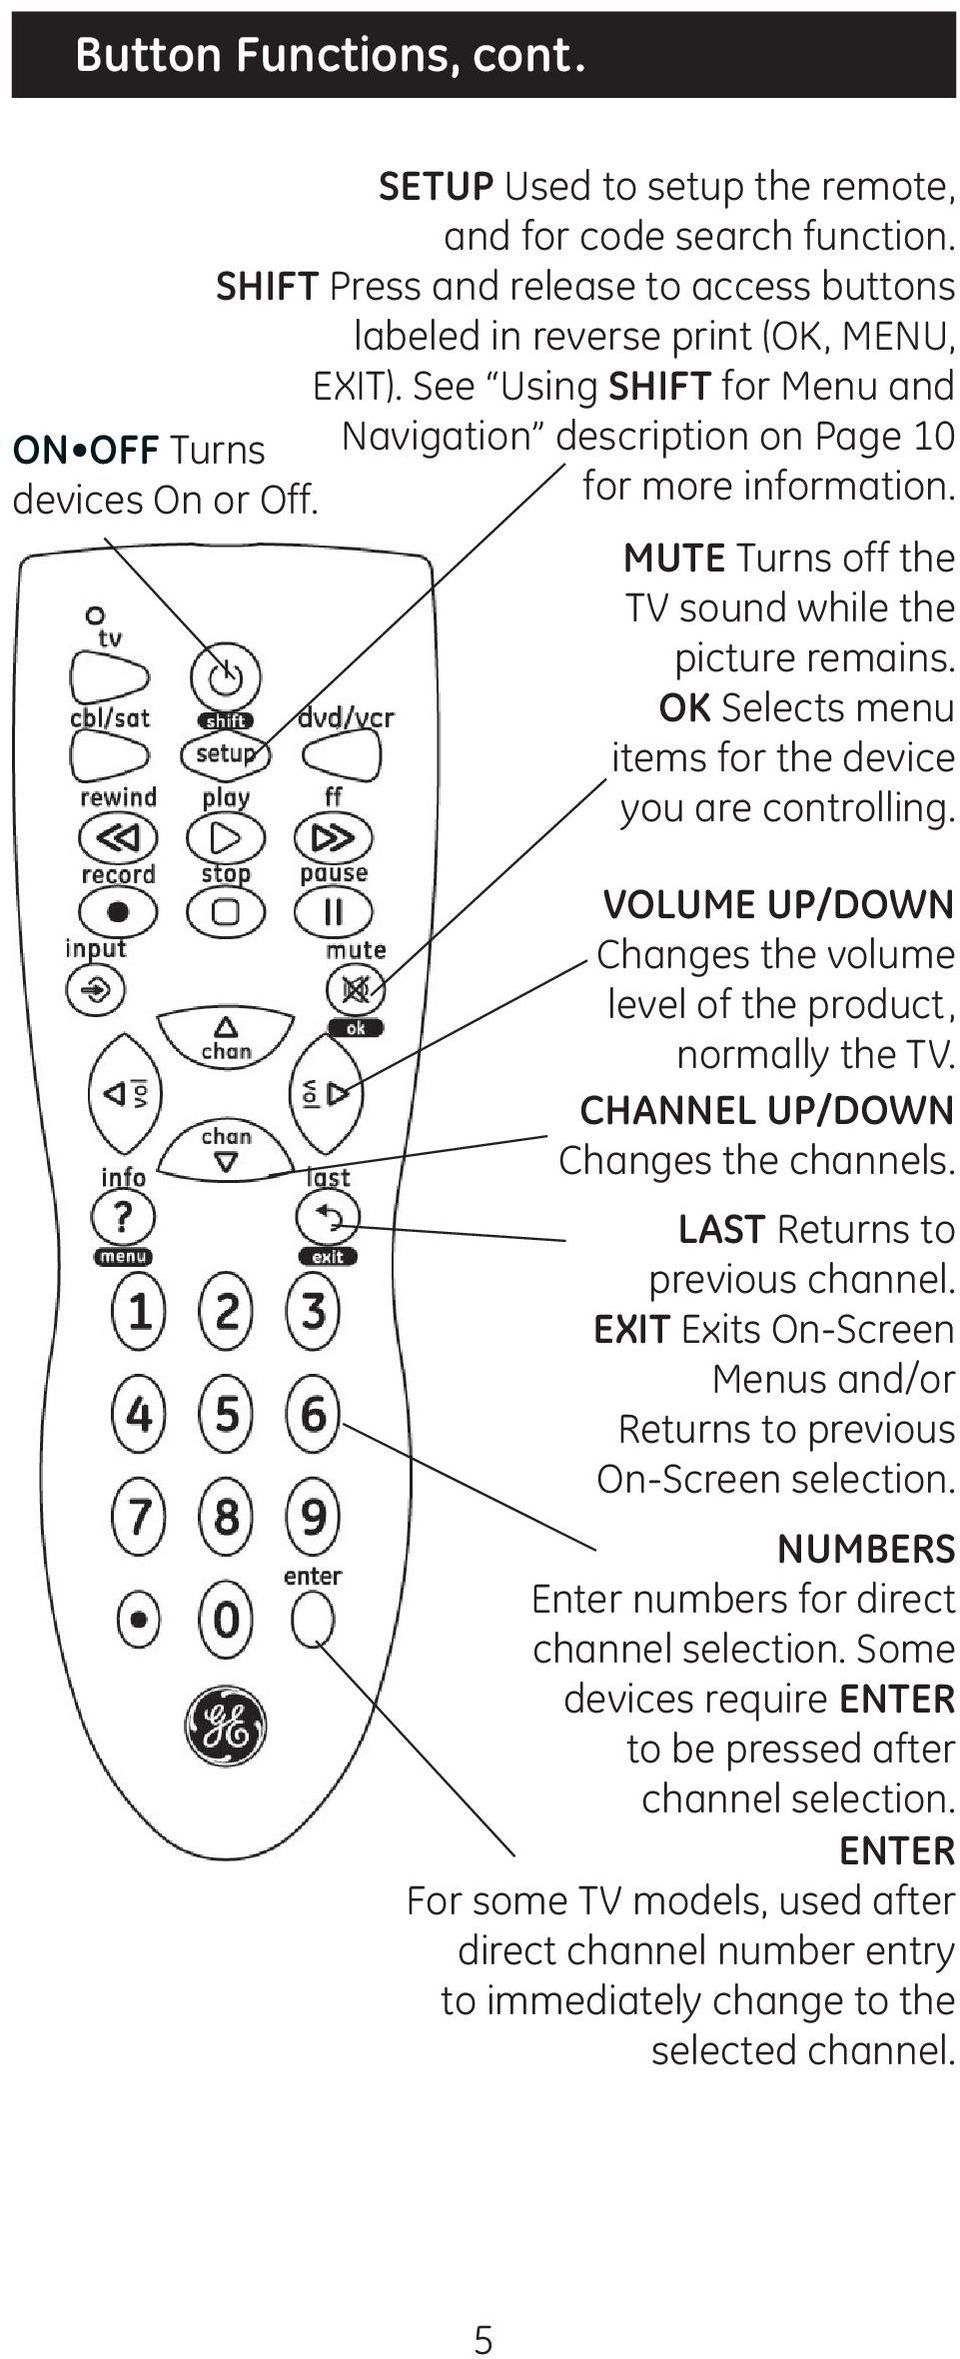 MUTE Turns off the TV sound while the picture remains. OK Selects menu items for the device you are controlling. VOLUME UP/DOWN Changes the volume level of the product, normally the TV.